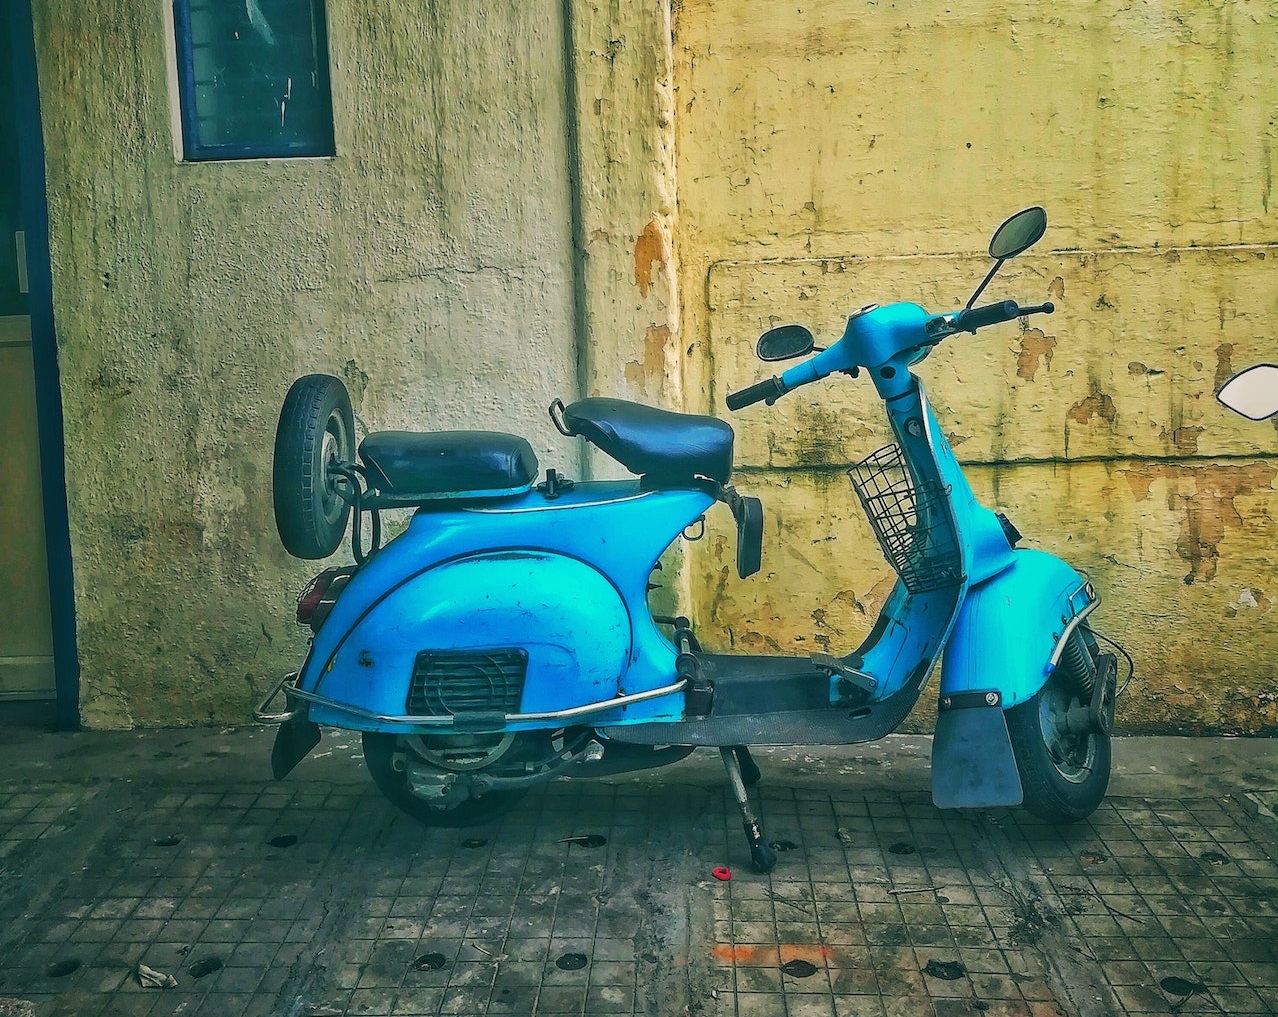 Teal Scooter on Road | Veteran Car Donations